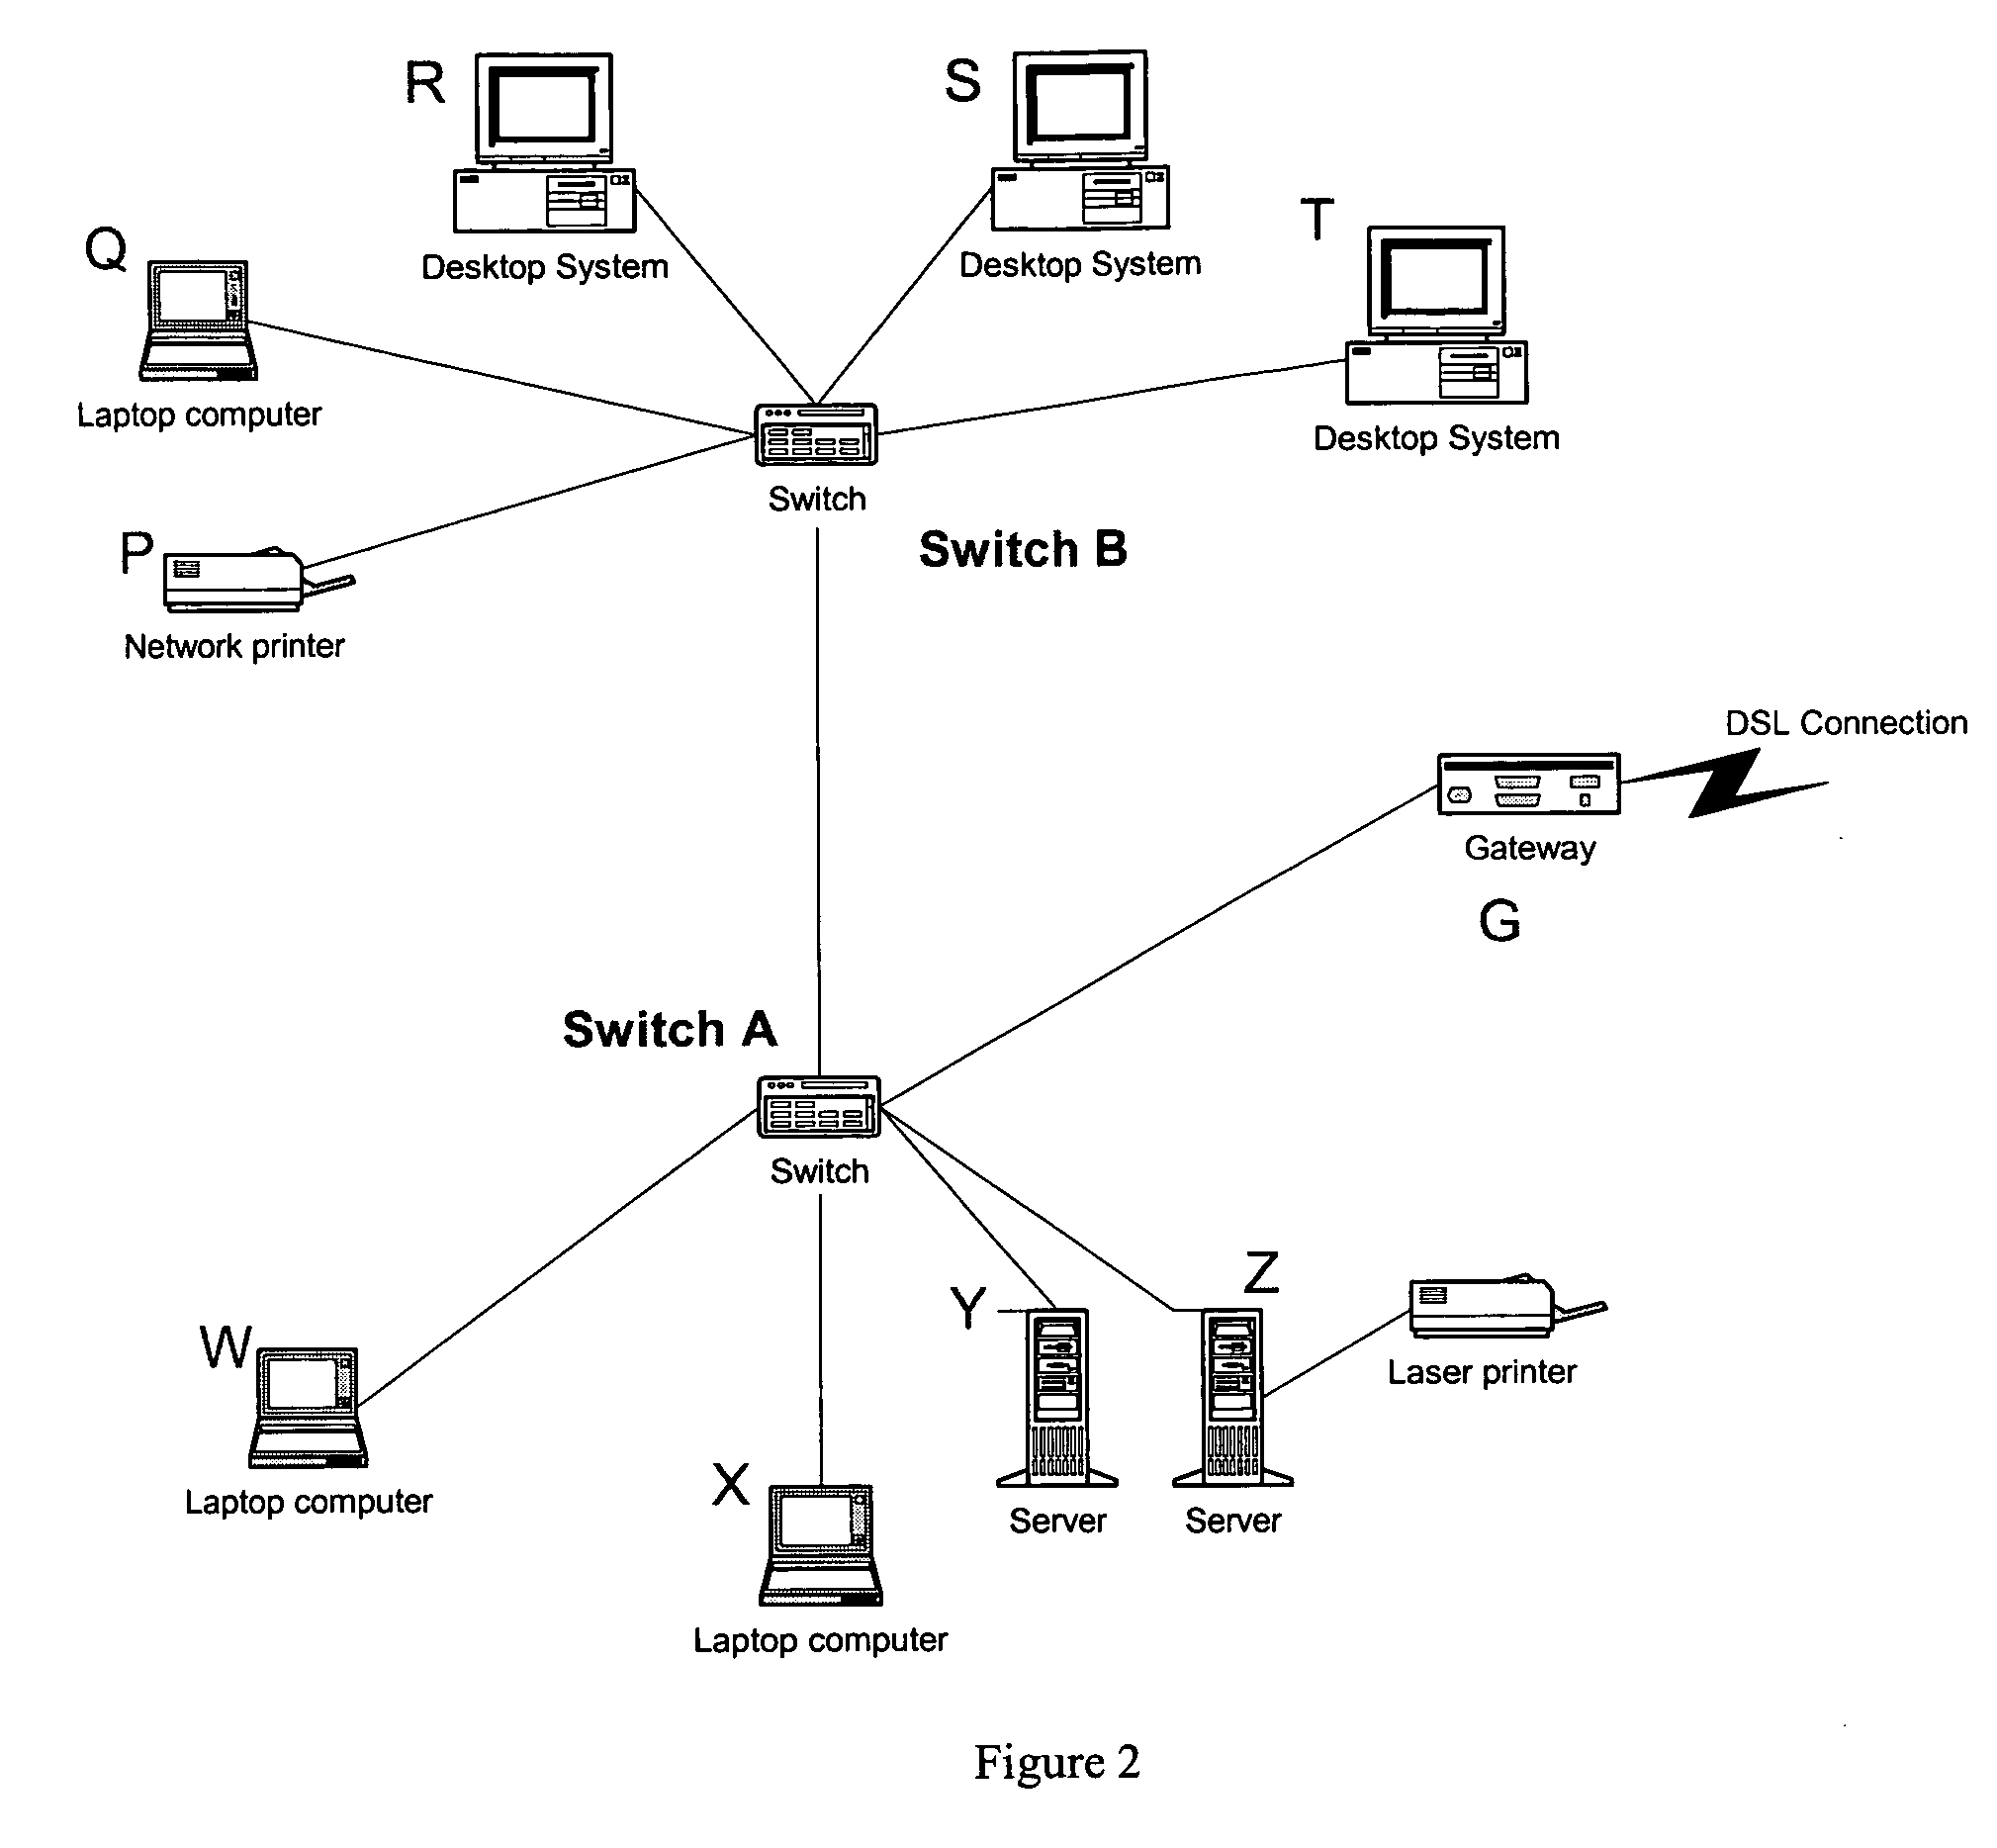 System for very simple network management (VSNM)